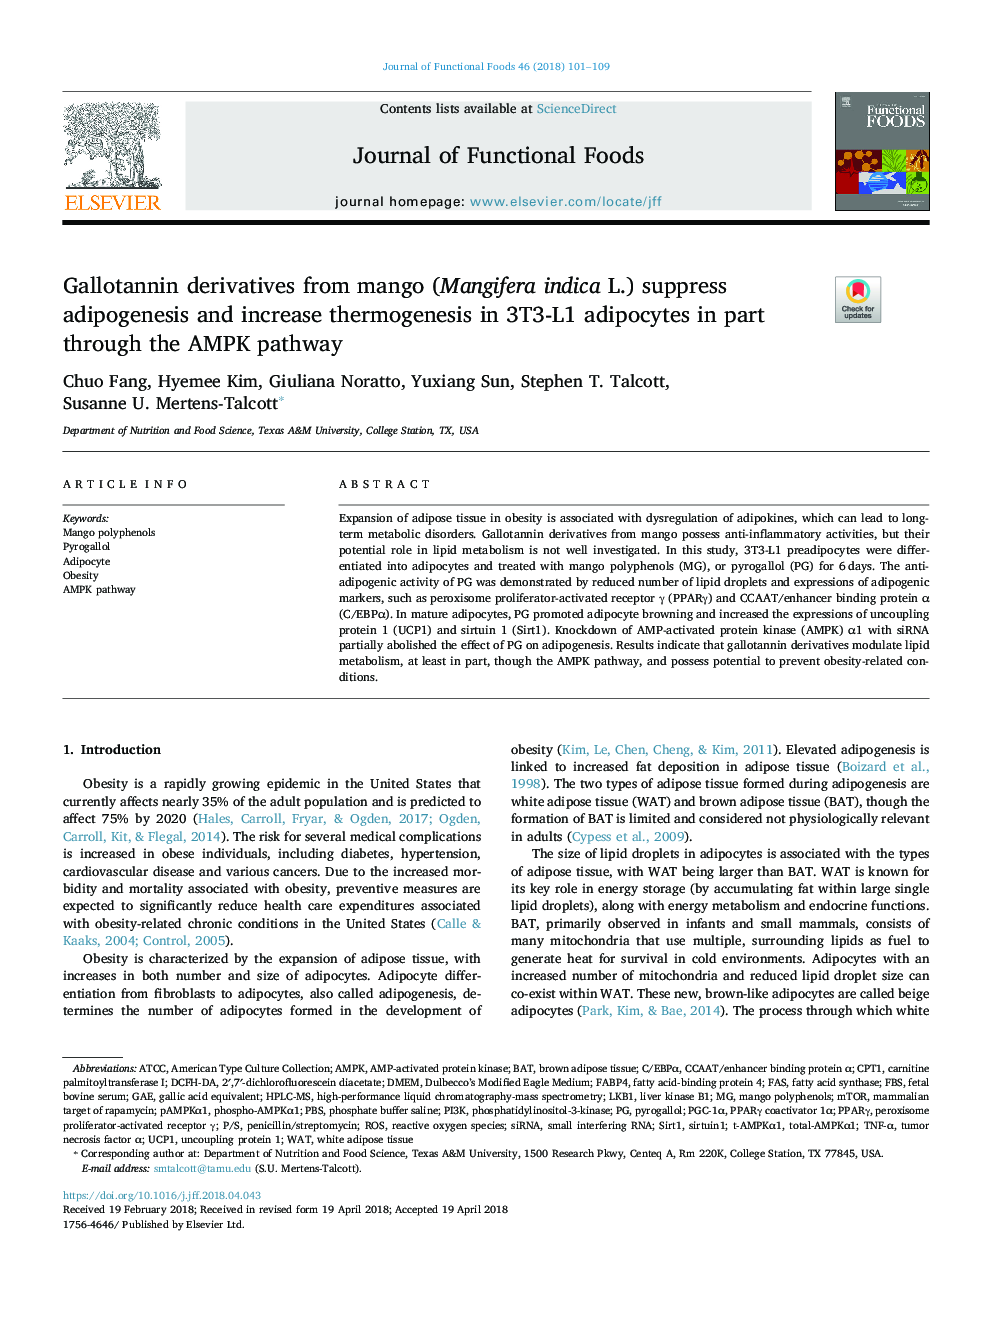 Gallotannin derivatives from mango (Mangifera indica L.) suppress adipogenesis and increase thermogenesis in 3T3-L1 adipocytes in part through the AMPK pathway